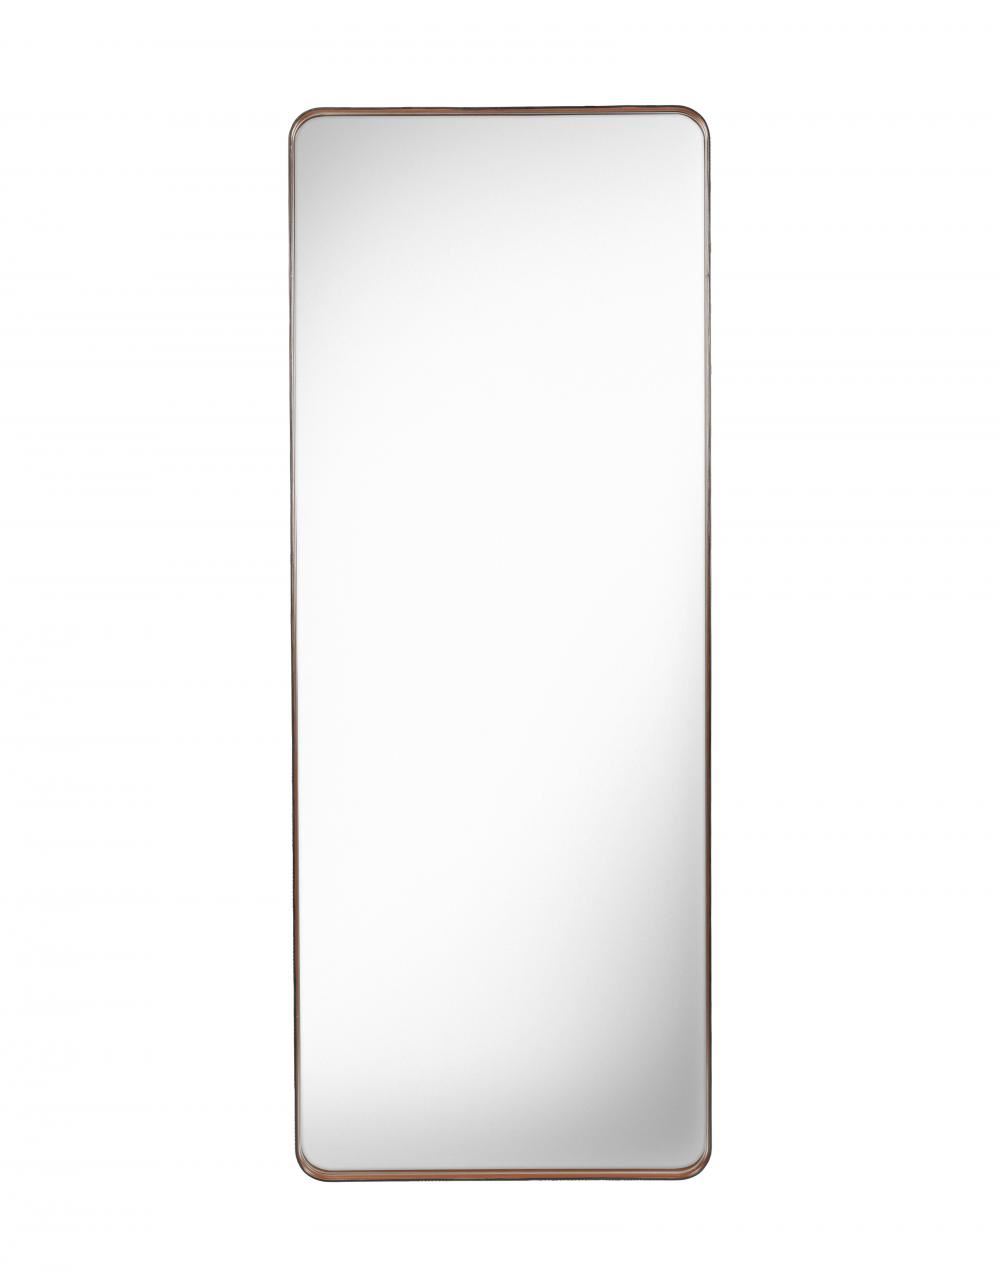 Adnet Rectangulaire Wall Mirror Large Tan